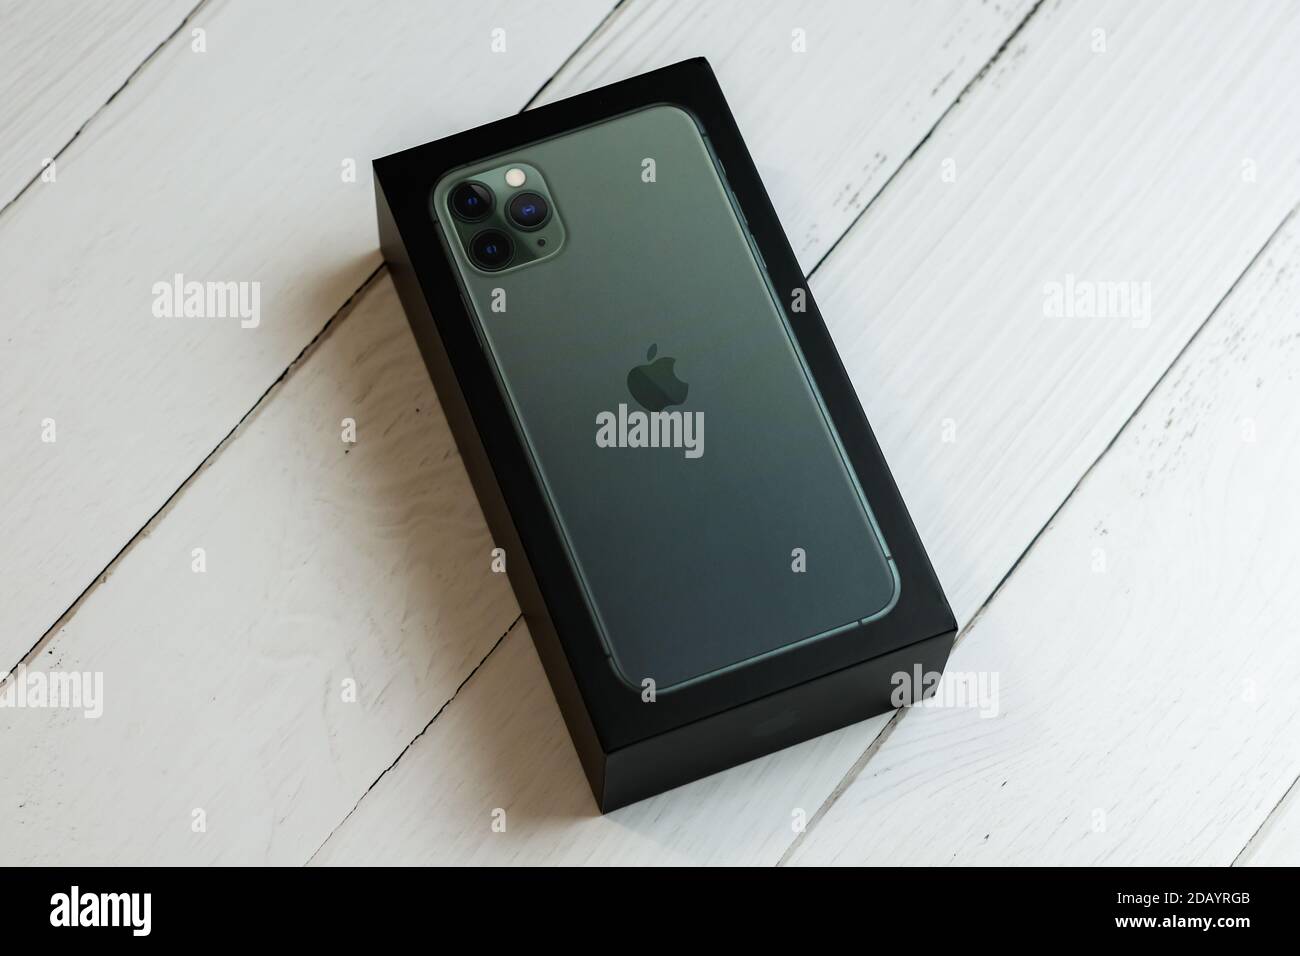 Iphone 11 Pro Max In Midnight Green Inside Its Box Stock Photo Alamy